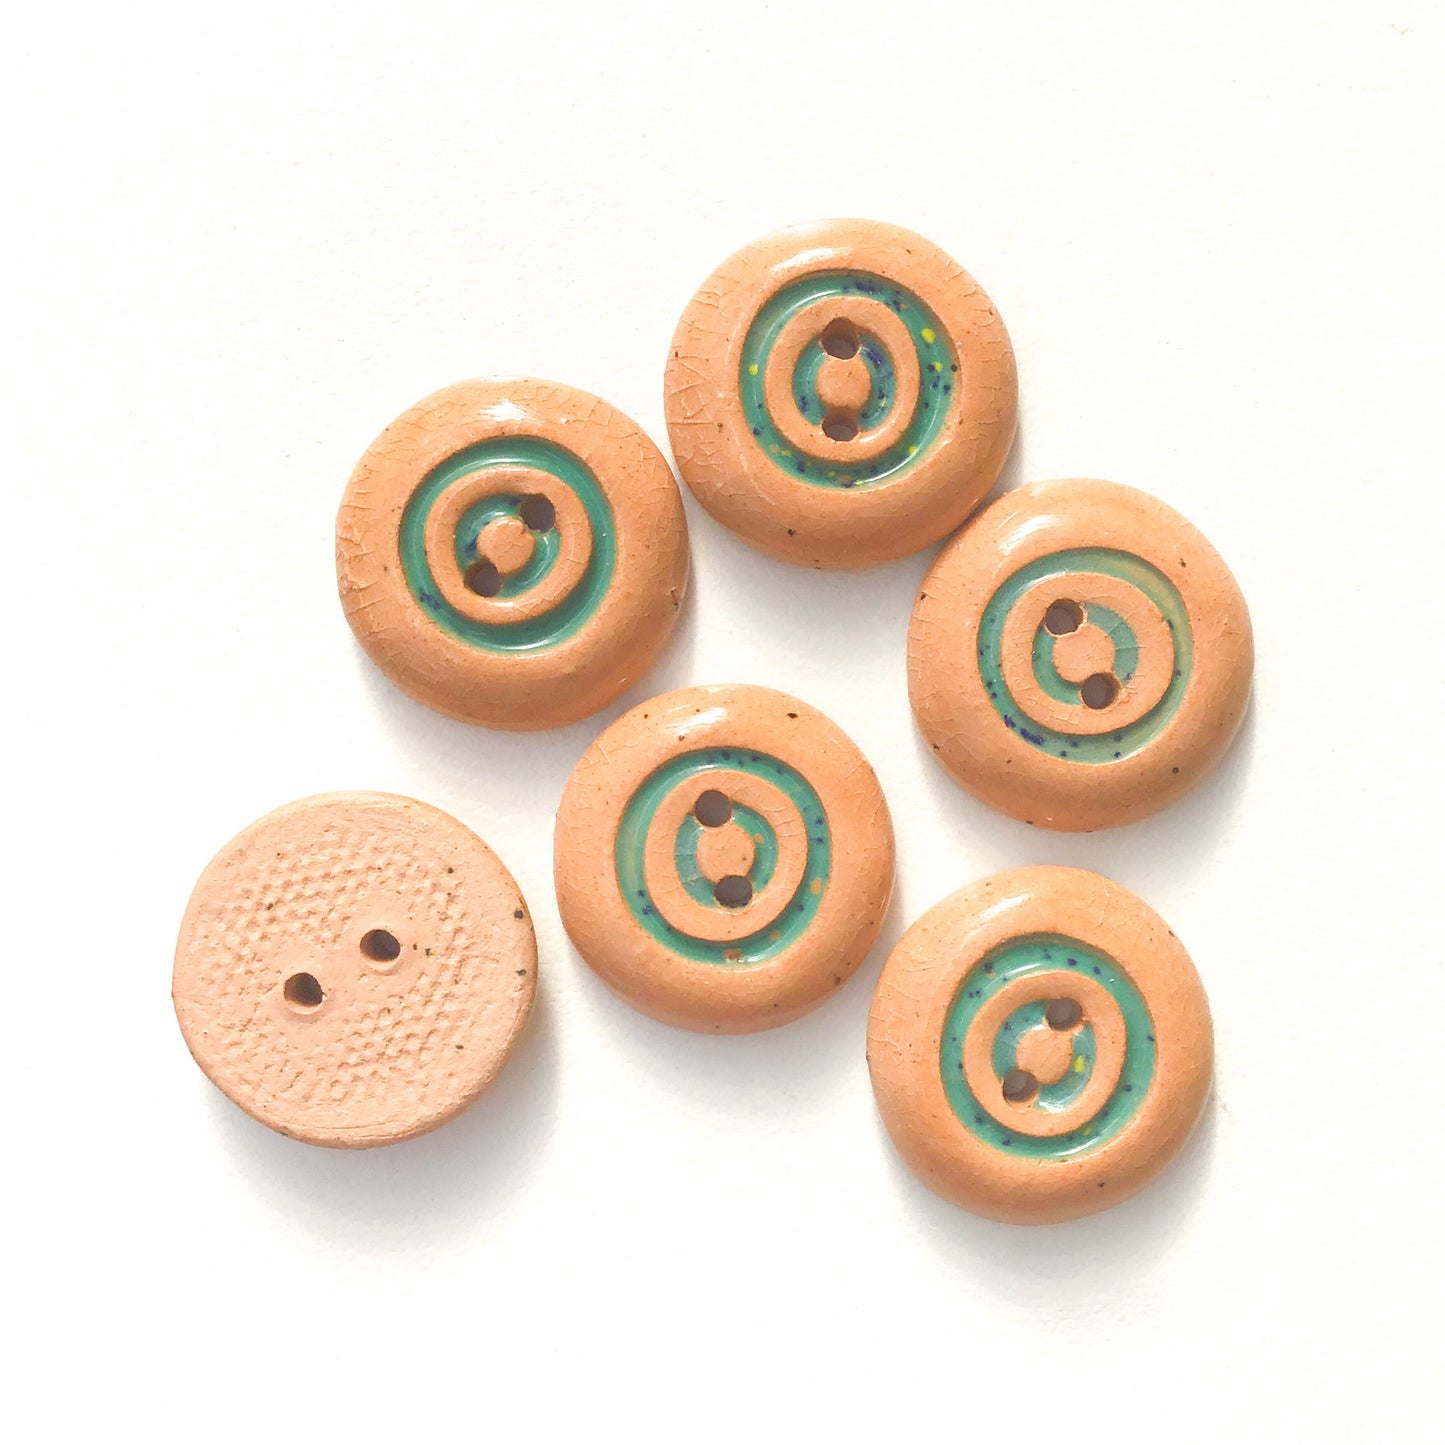 Turquoise Concentric Circle Ceramic Buttons on Brown Clay - 3/4" - 6 Pack